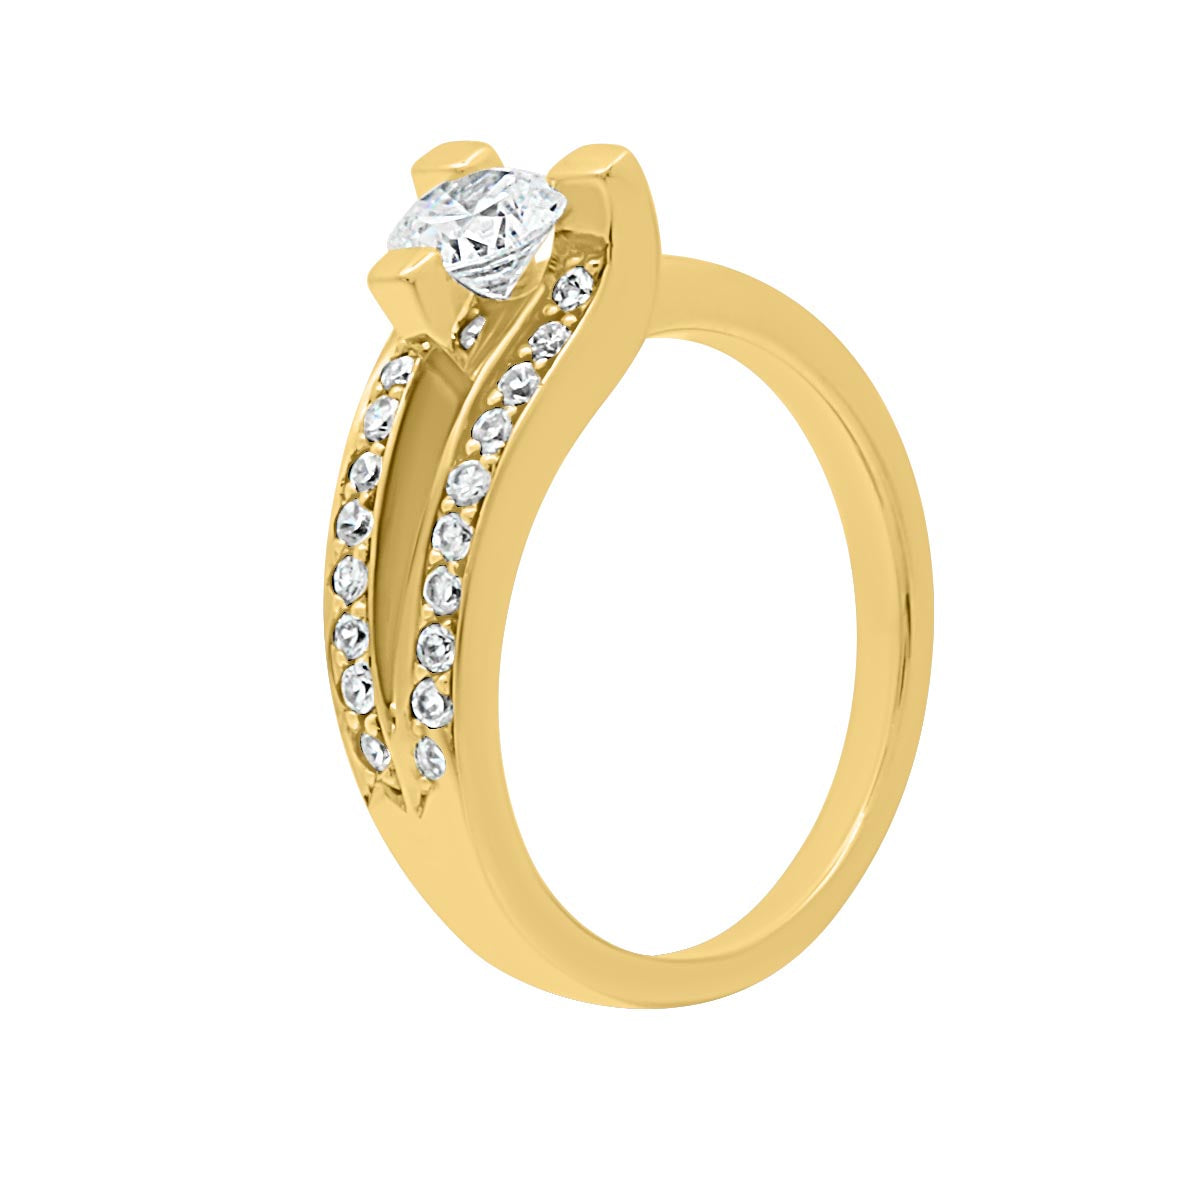 Unusual Diamond Engagement Ring Set in yellow Gold viewed from a angled view